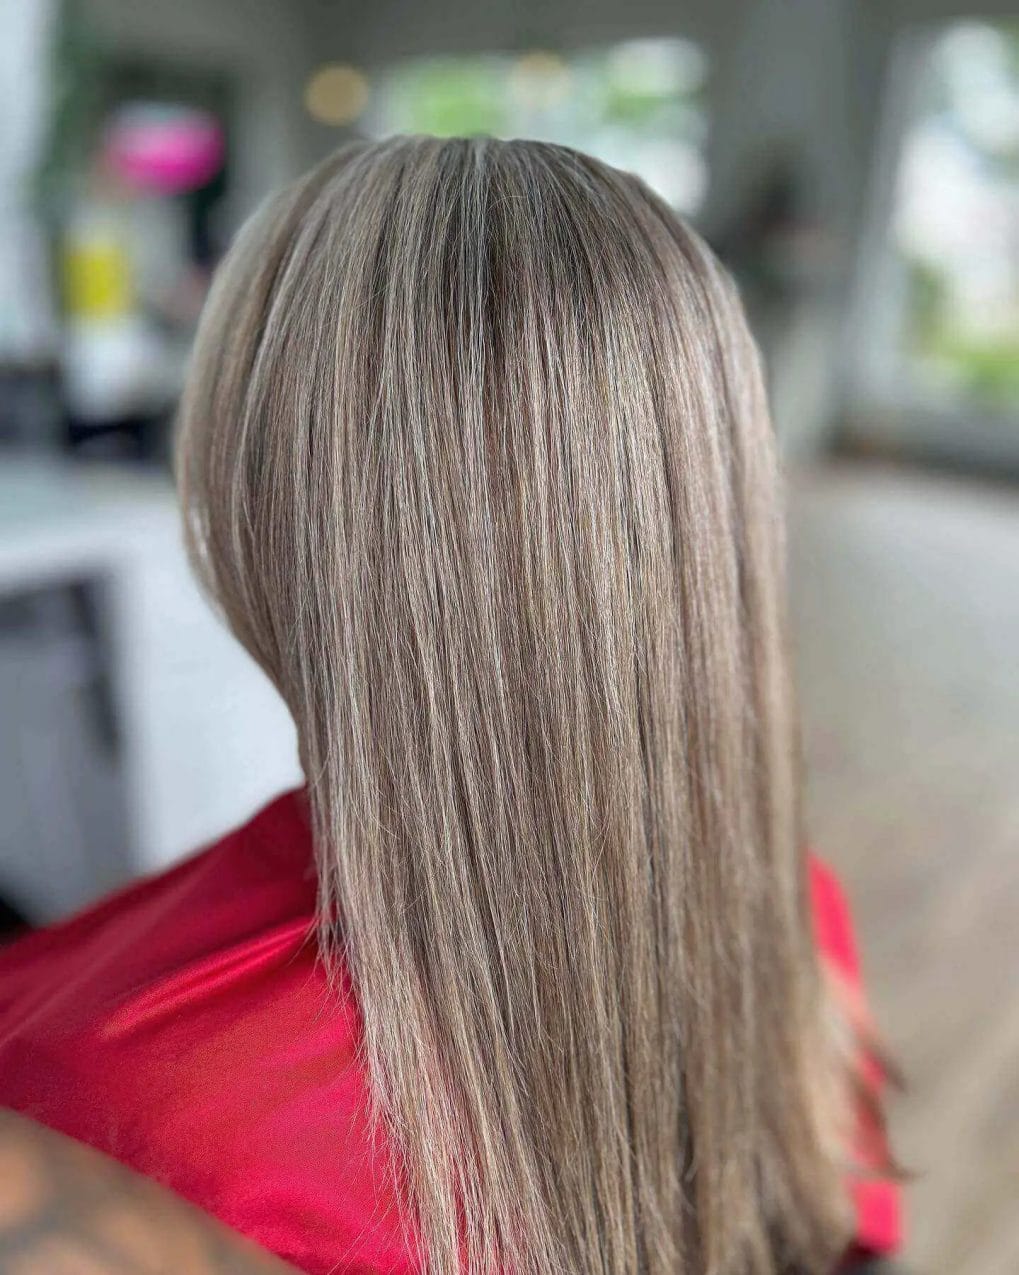 Sleek, straight hair with lustrous silvery and ash blonde highlights.